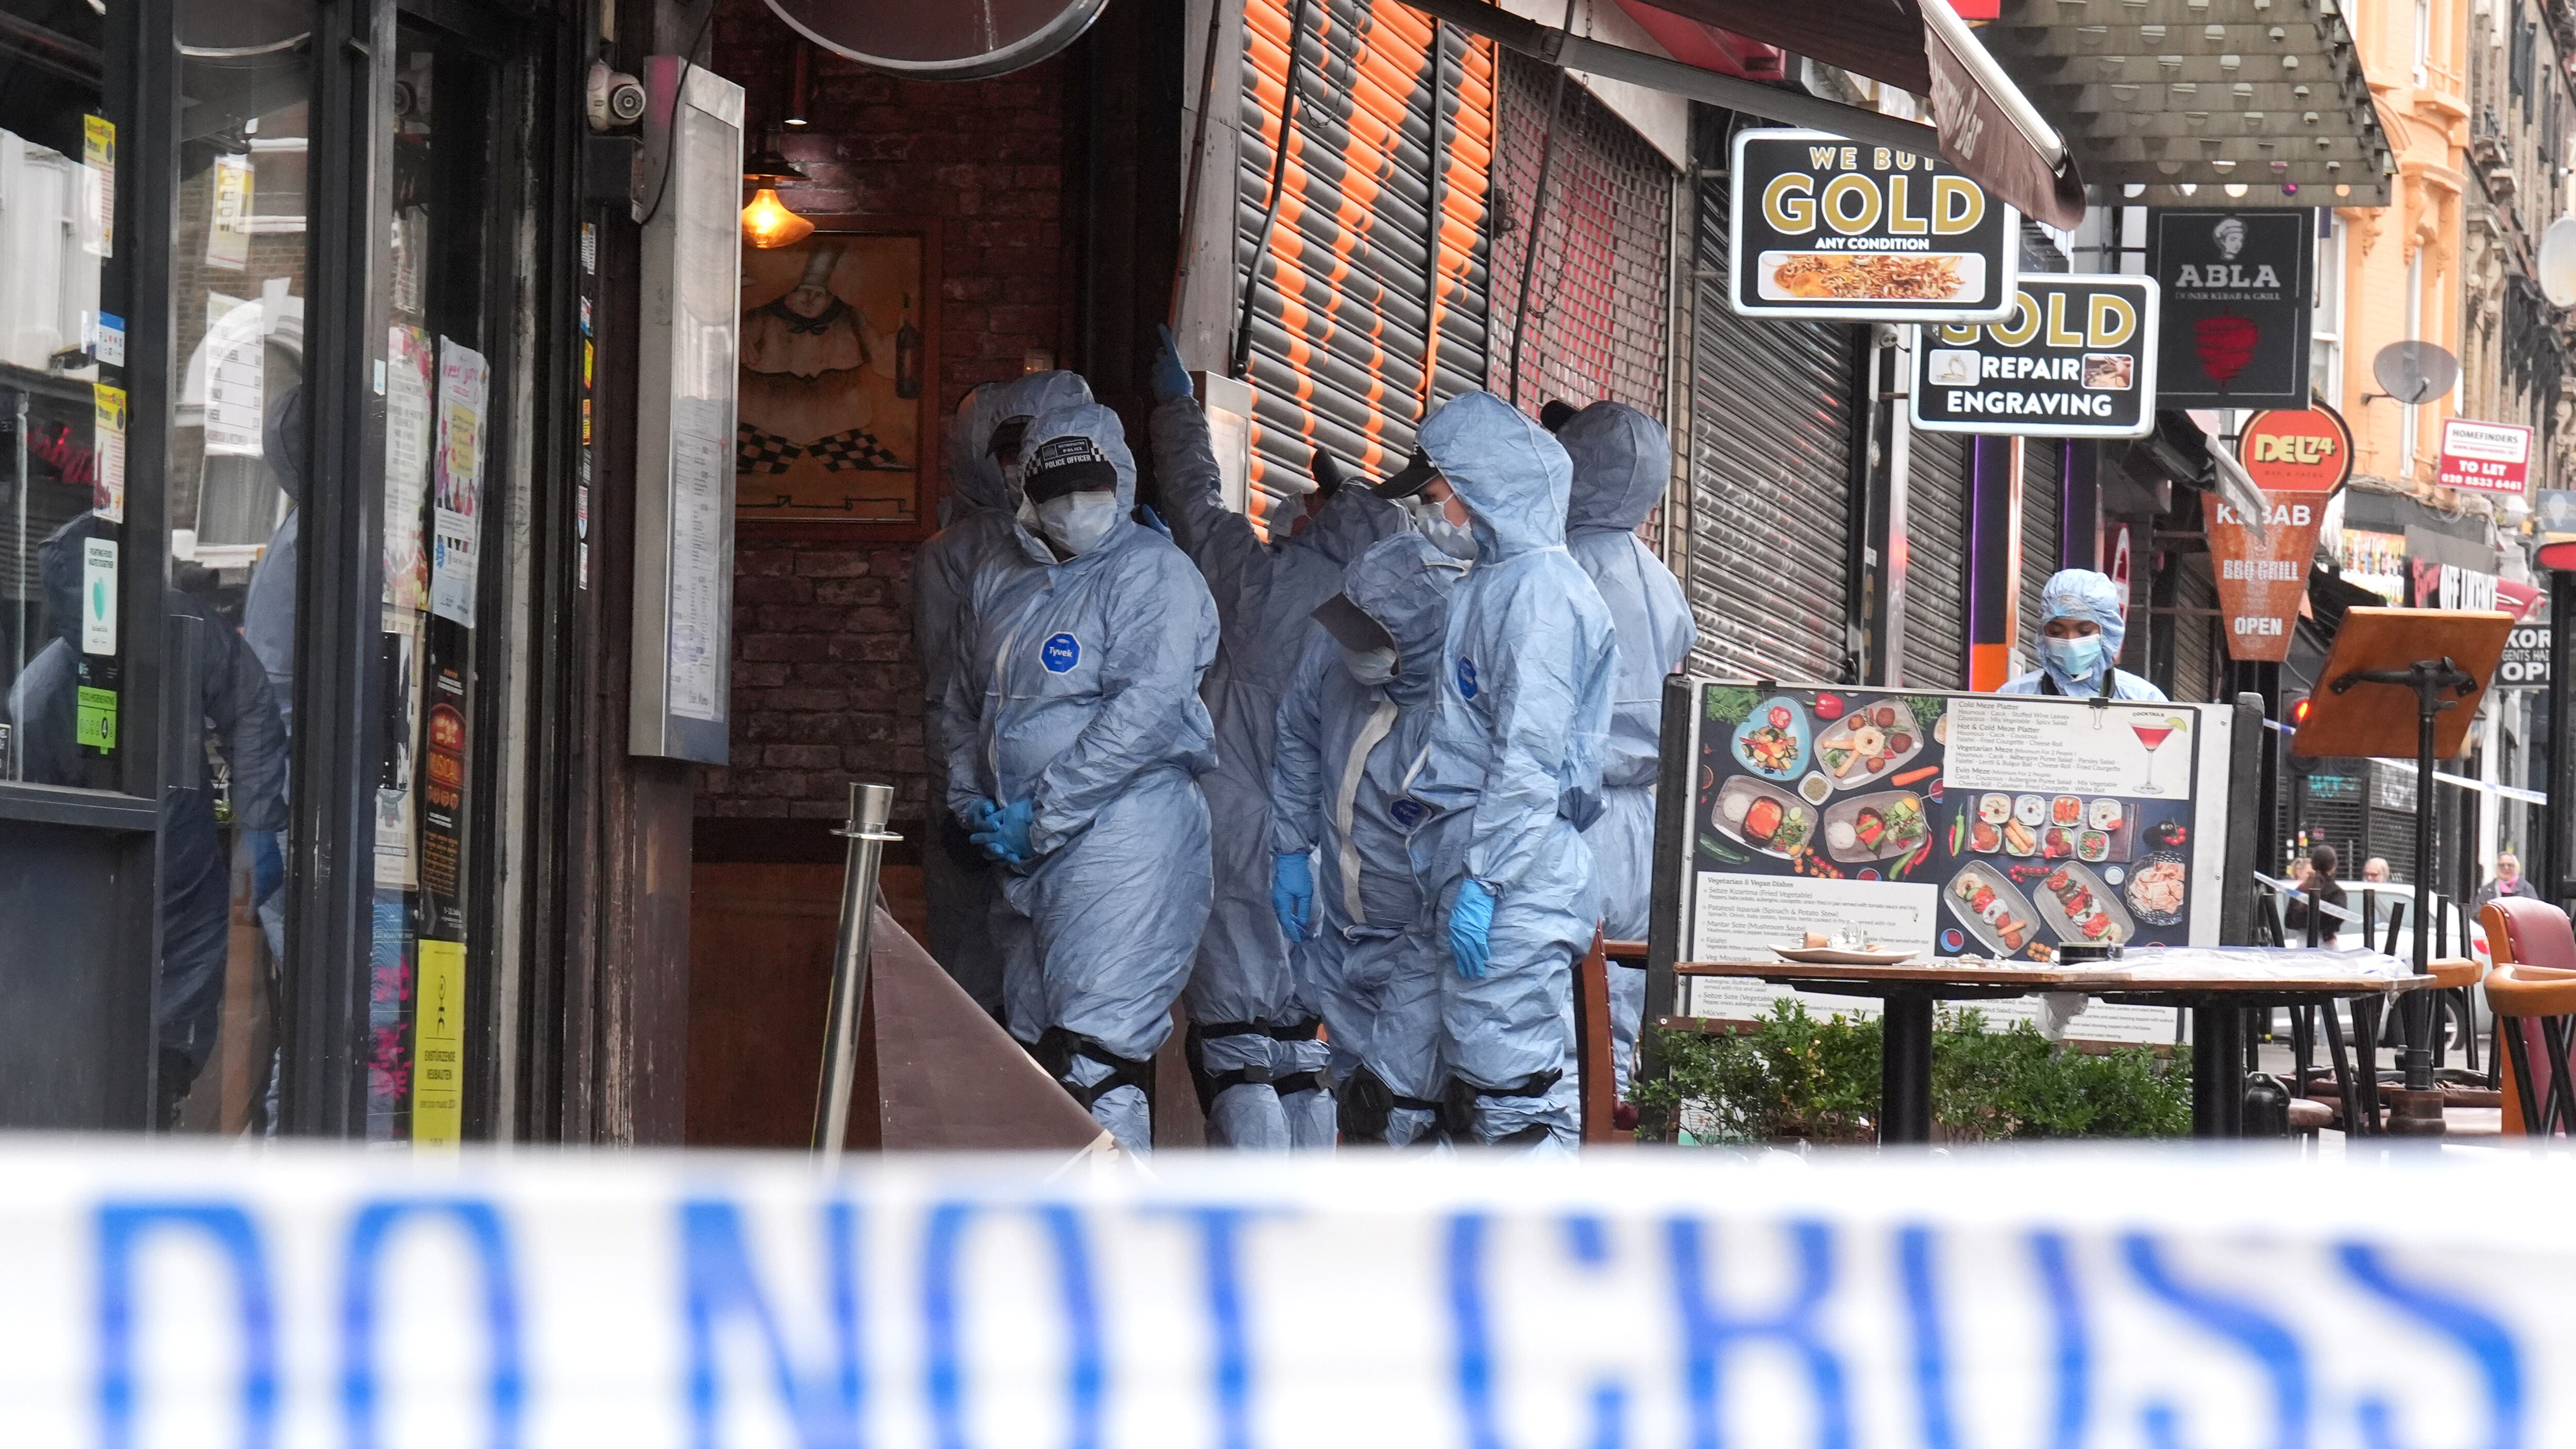 Police forensic officers at the scene of the shooting at Kingsland High Street in Hackney, east London